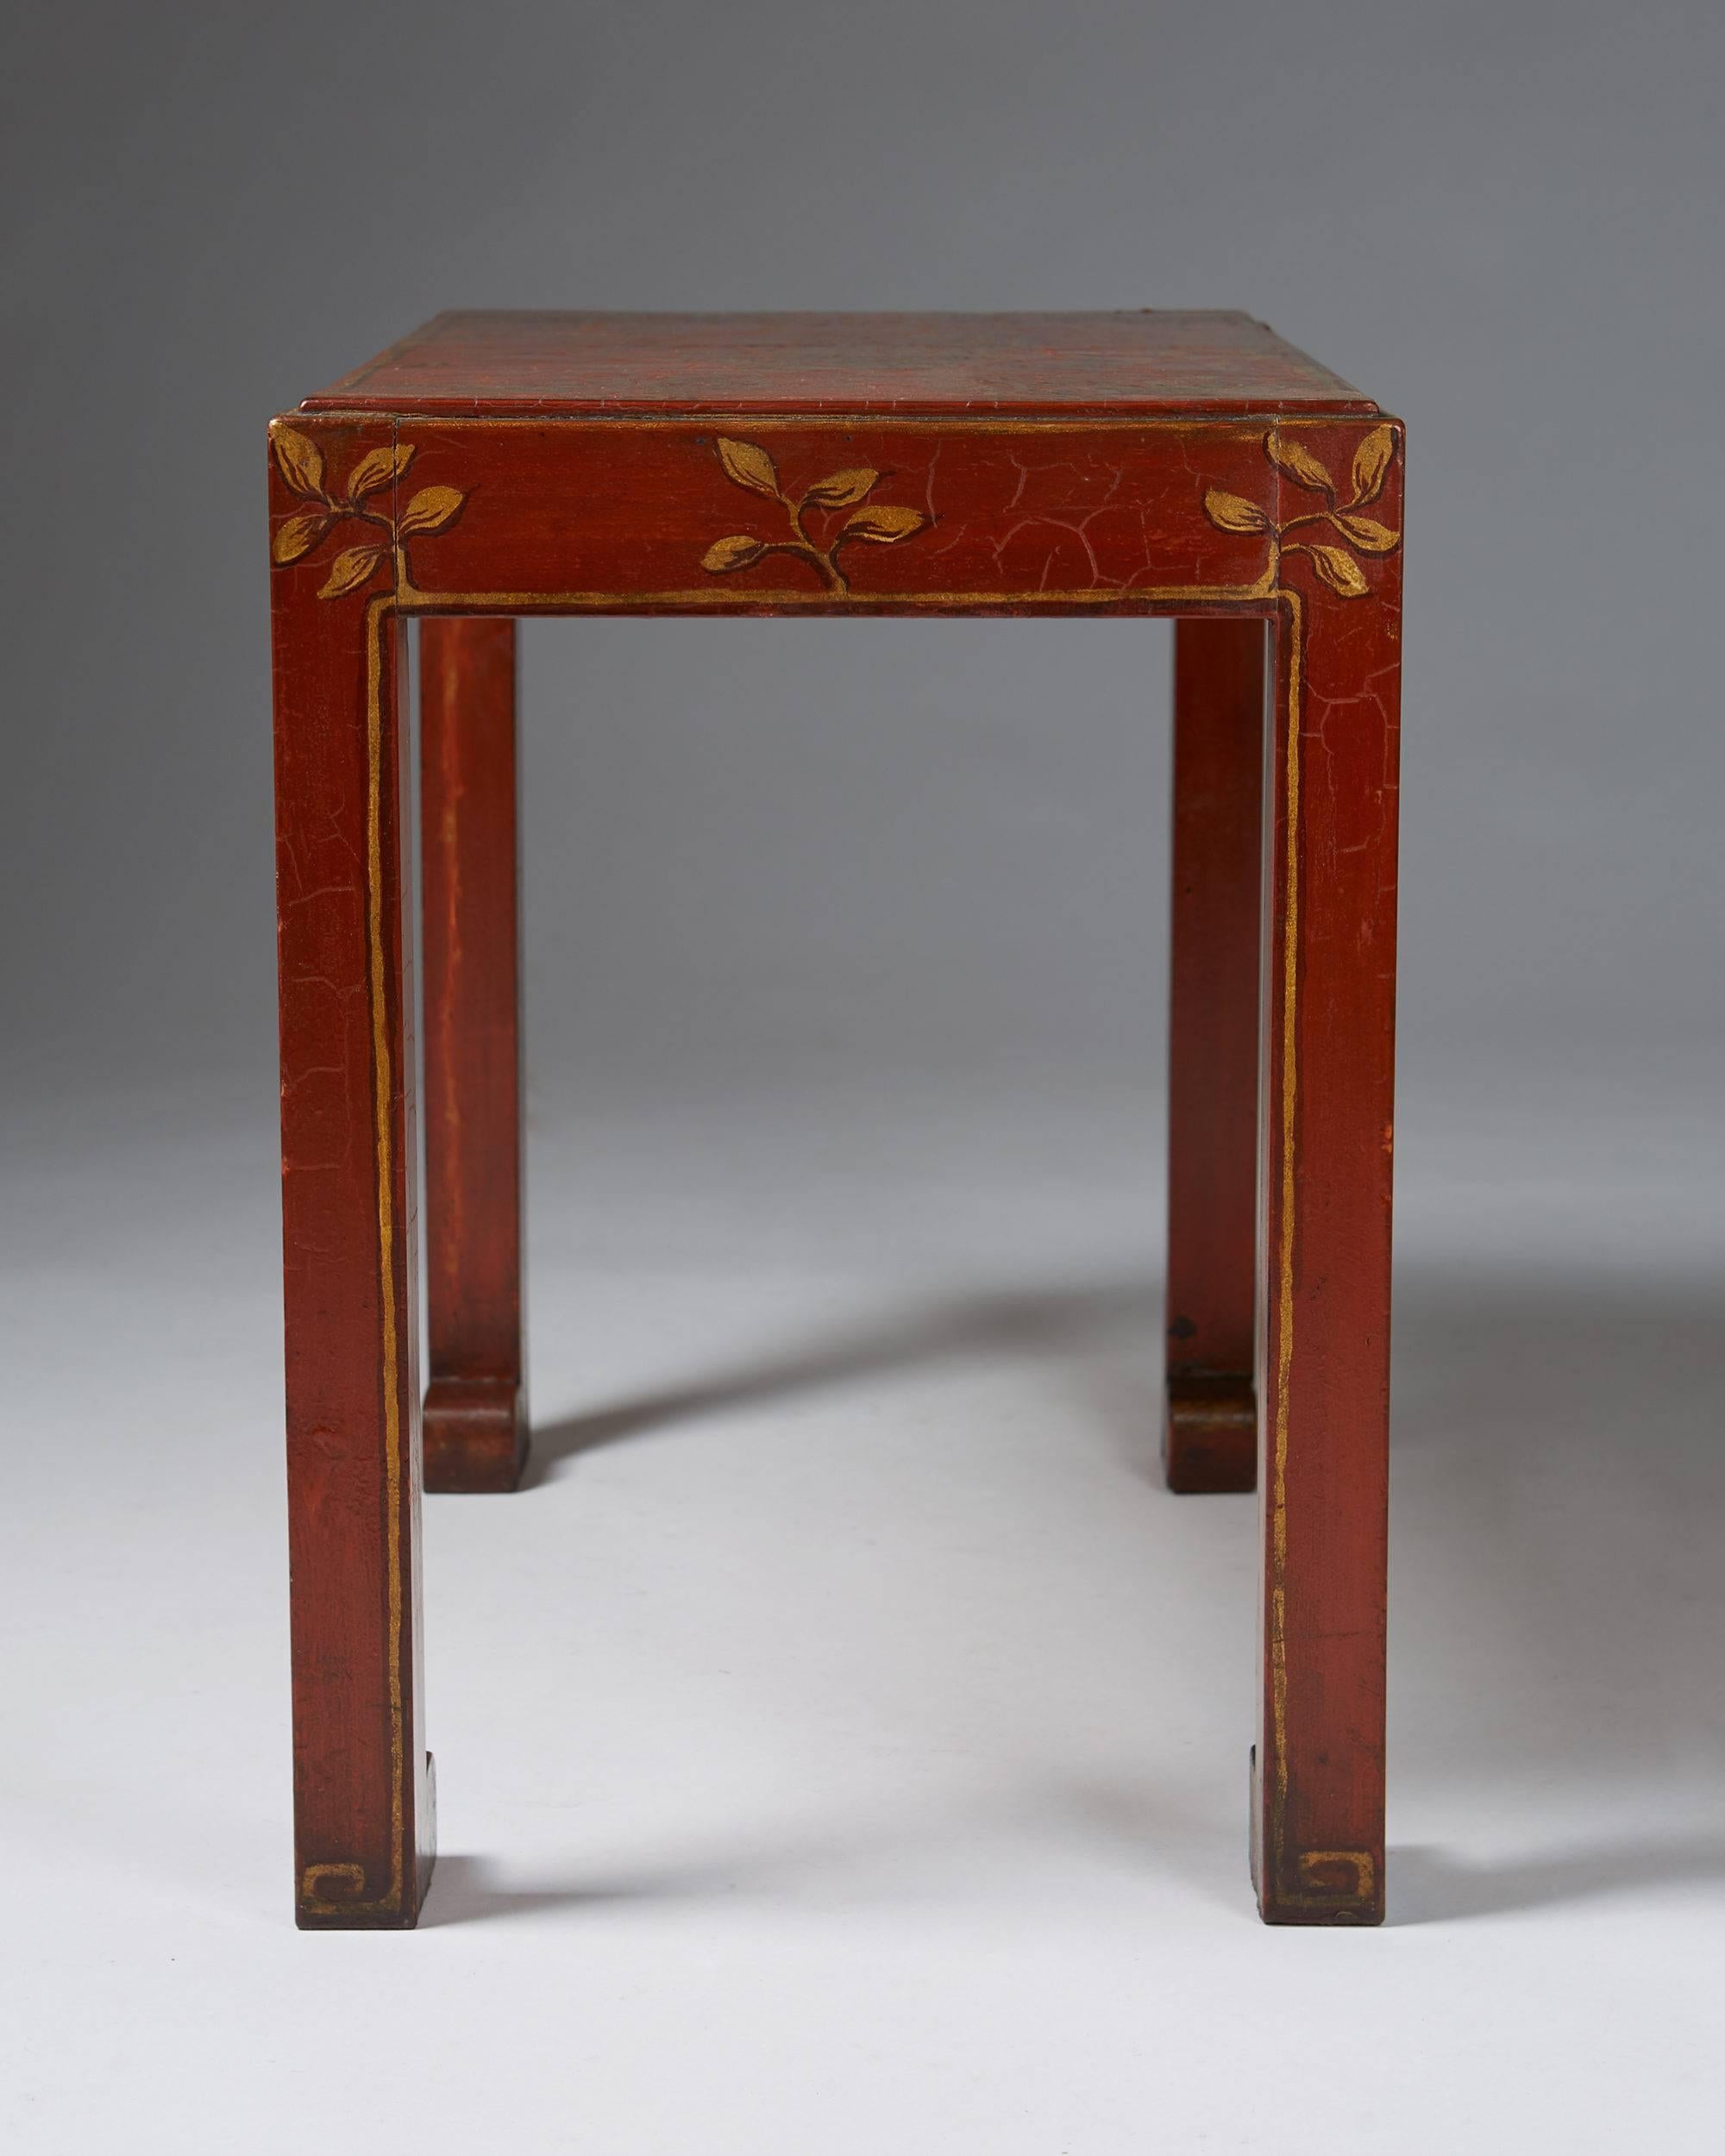 Occasional table designed by Carin Nilsson, Sweden, 1930s.
Hand-painted wood, painted by the artist.
Provenance: Estate of the artist.

Measures: H 55 cm/ 21 1/2